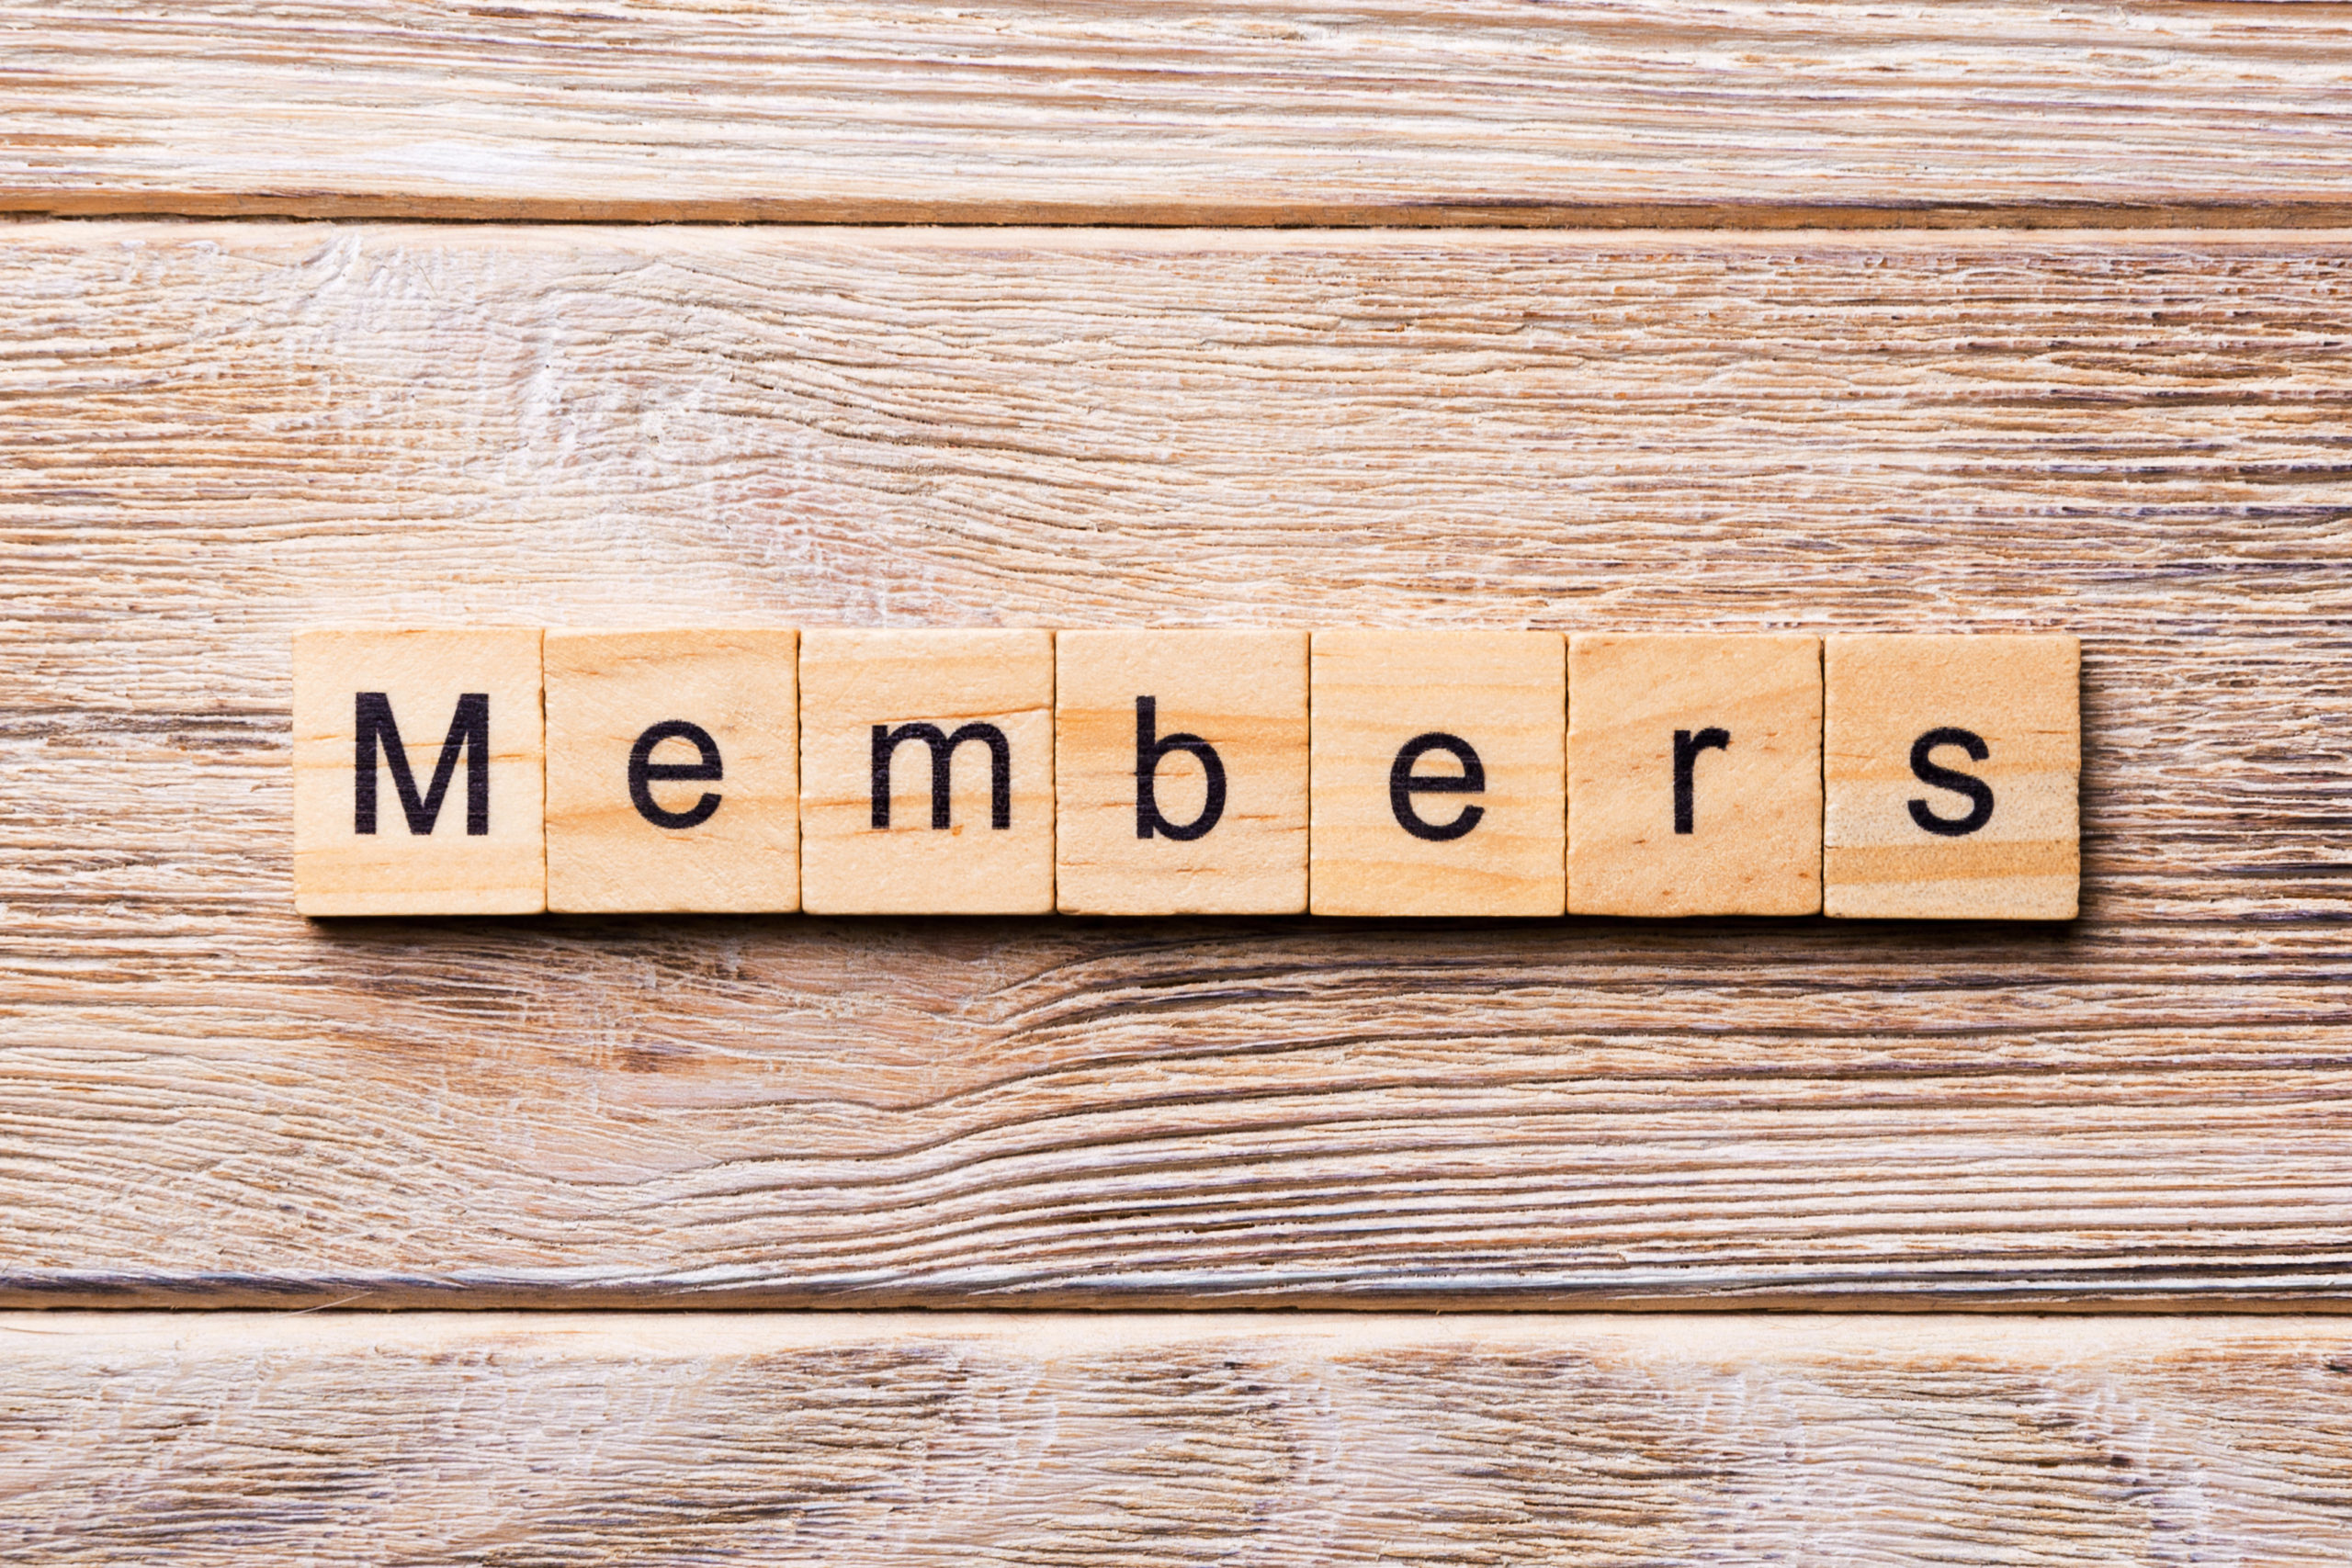 What Factors Make a Great Member Experience